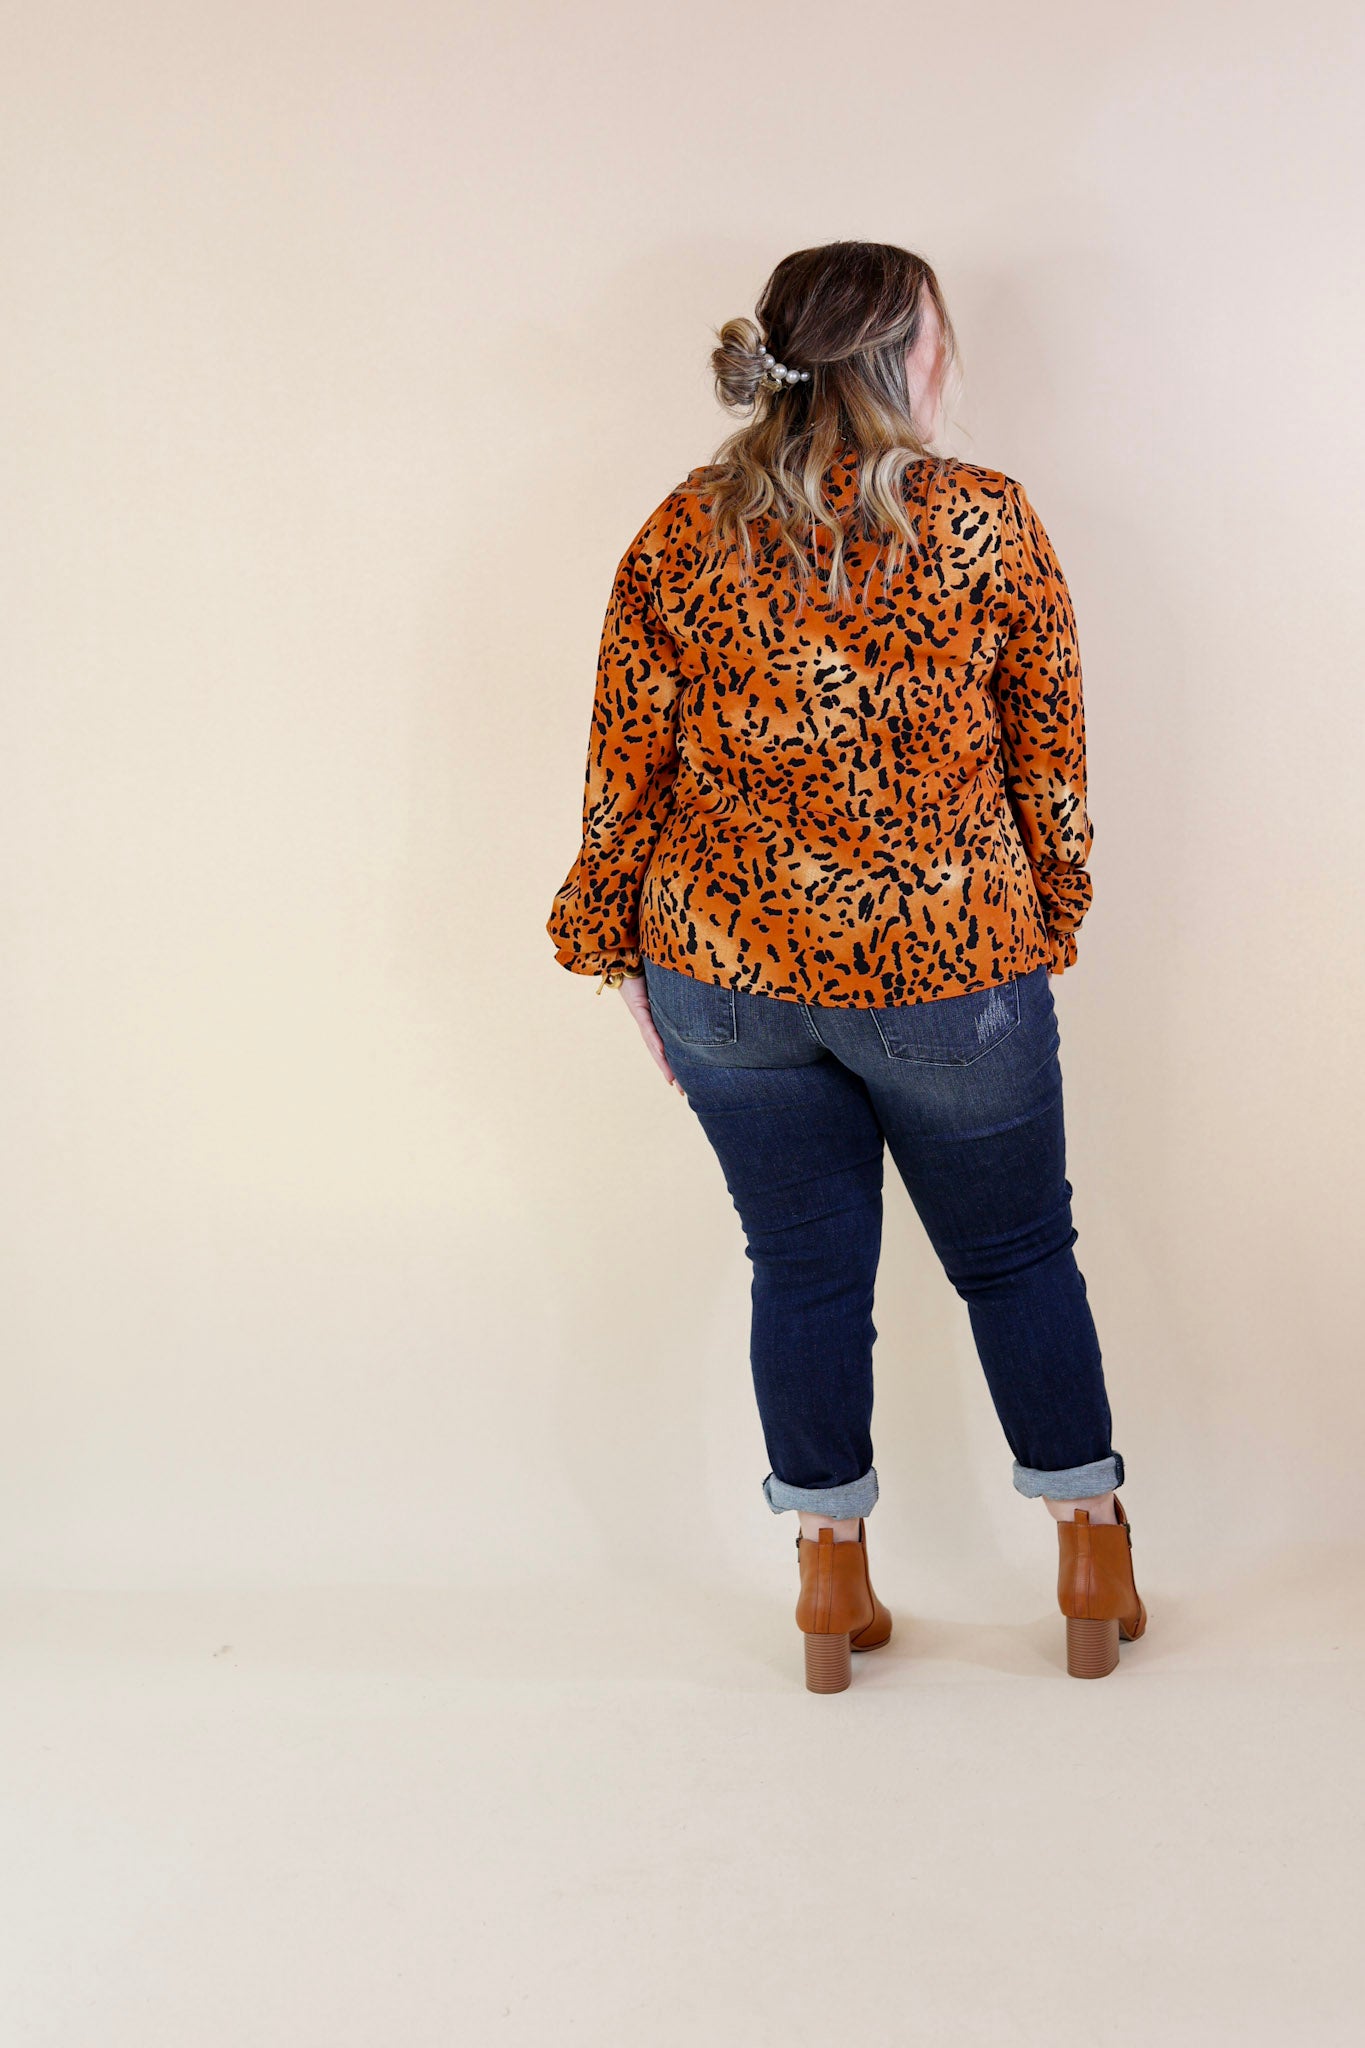 Boss Lady Leopard Print Top in Rust Orange - Giddy Up Glamour Boutique